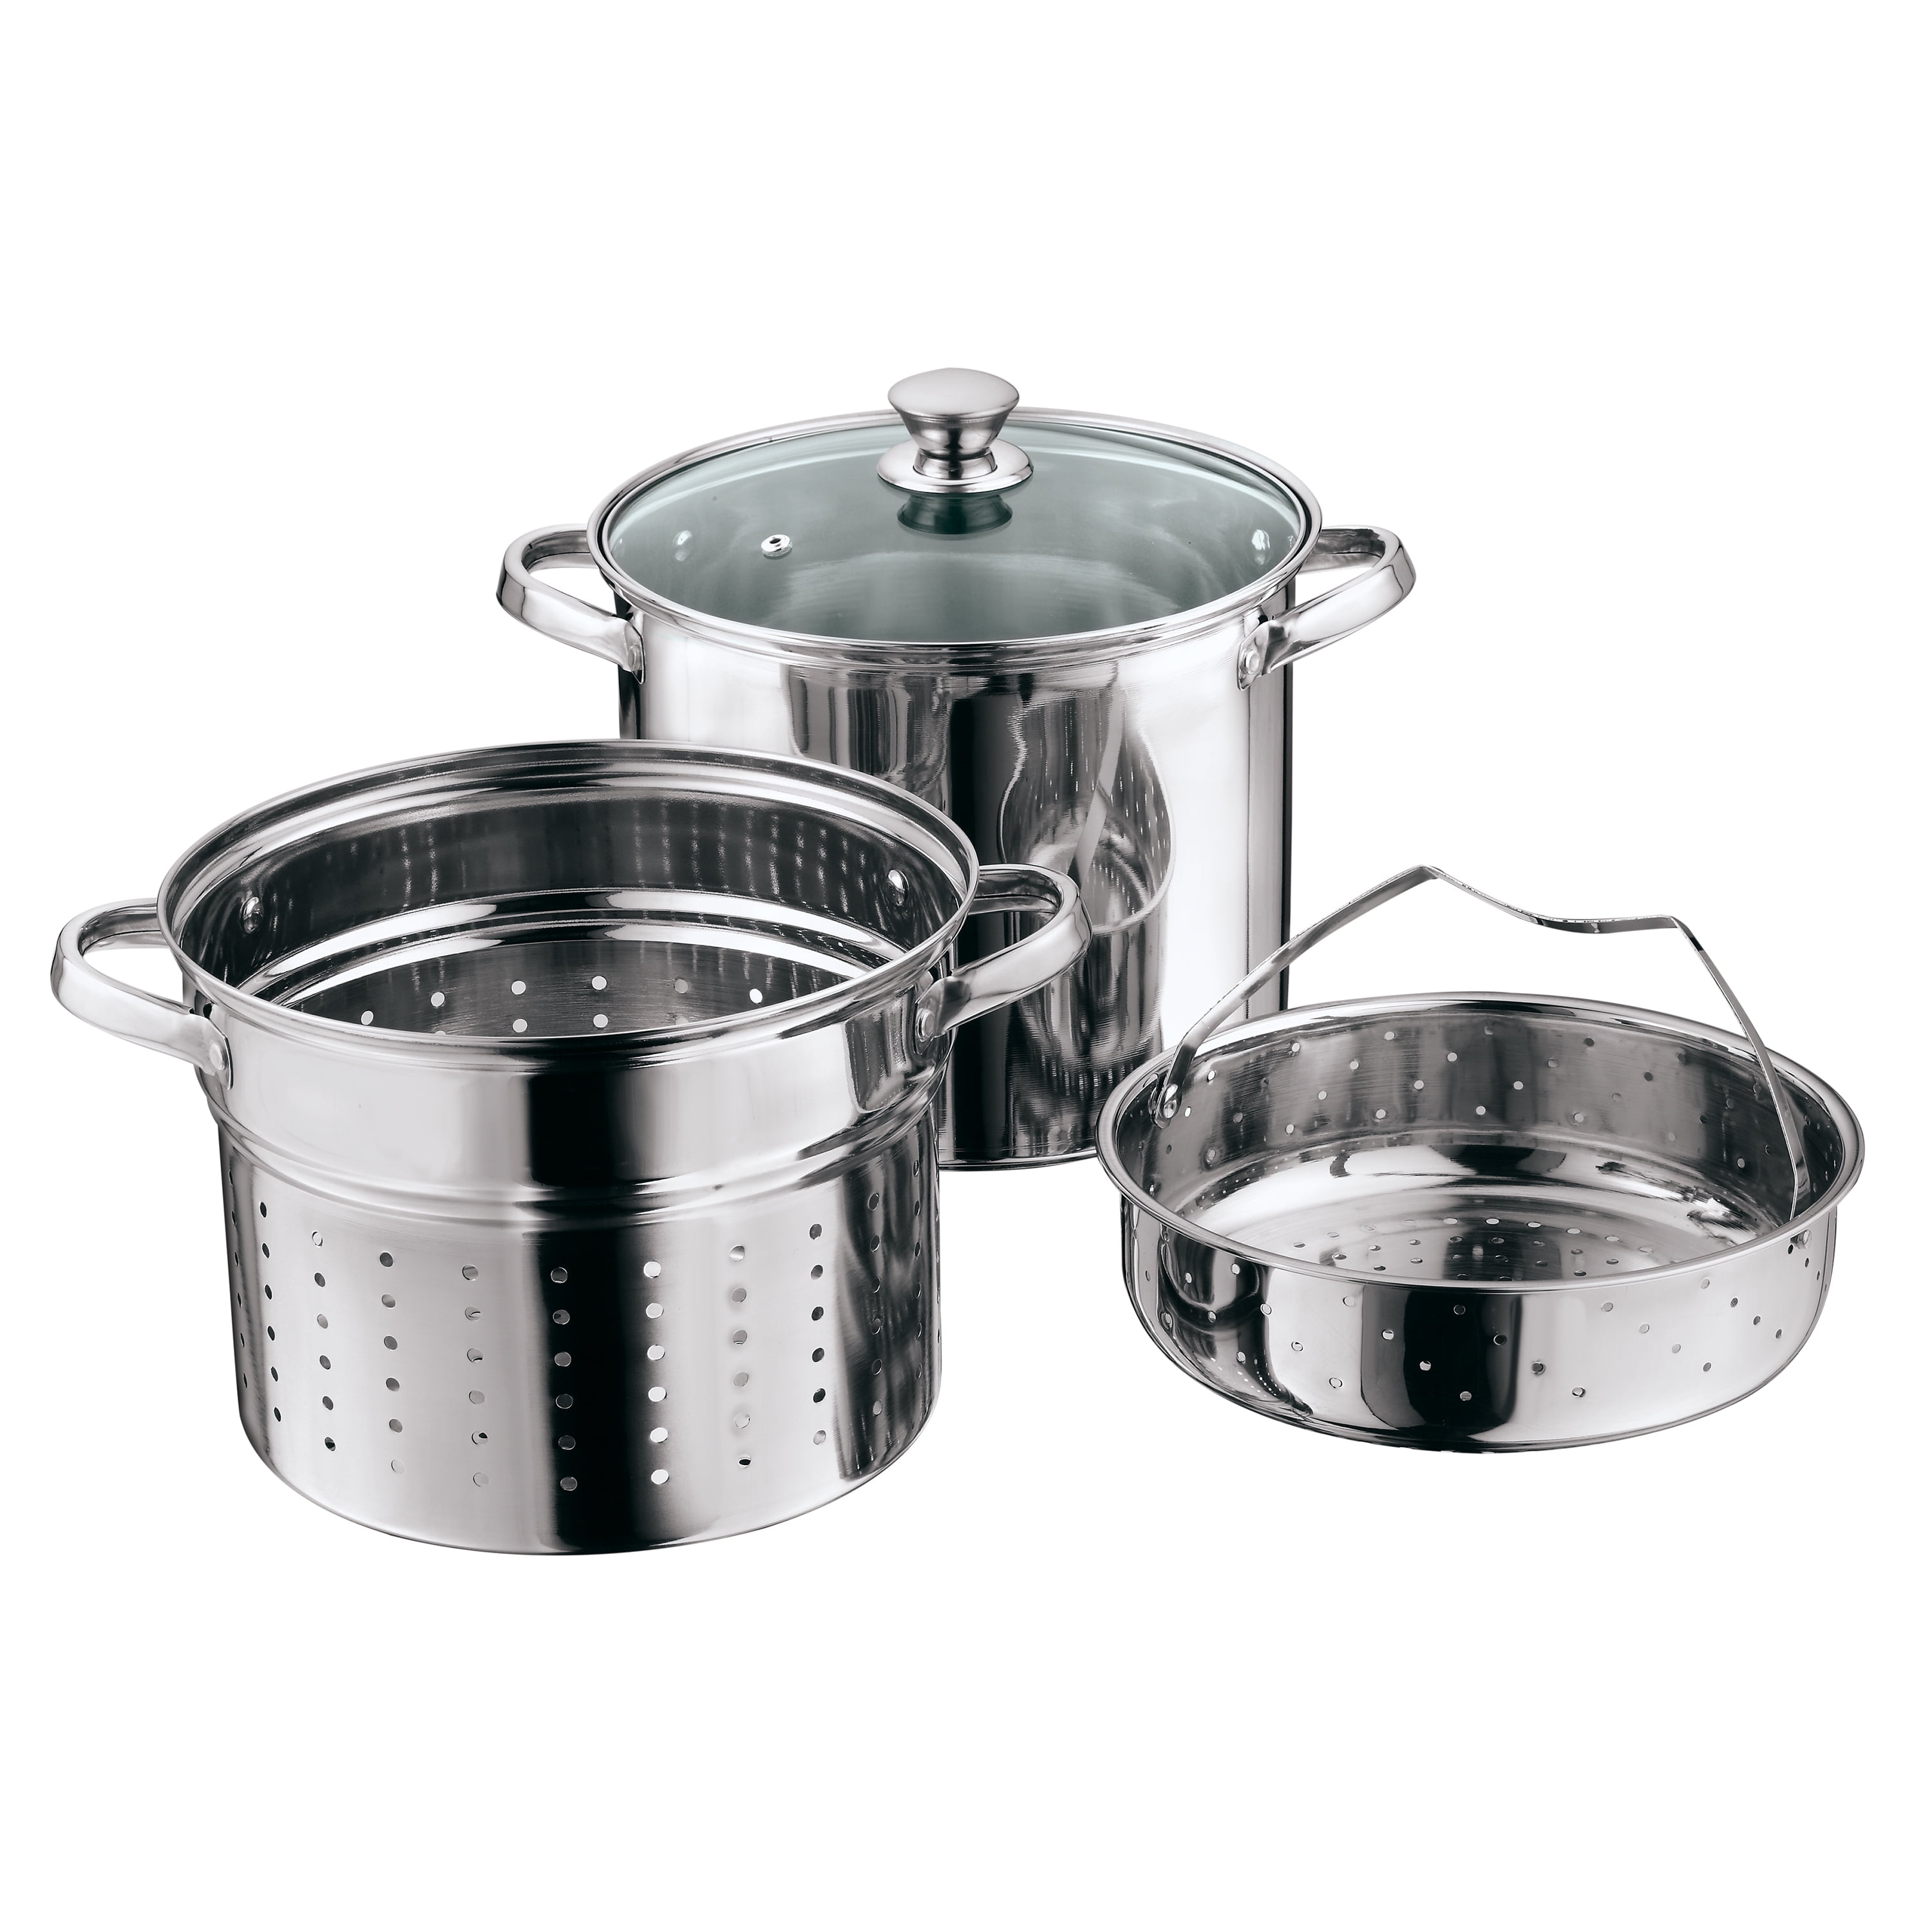 Cook N Home 02609 Lid 5-Quart Stainless Steel Casserole Stockpot Silver